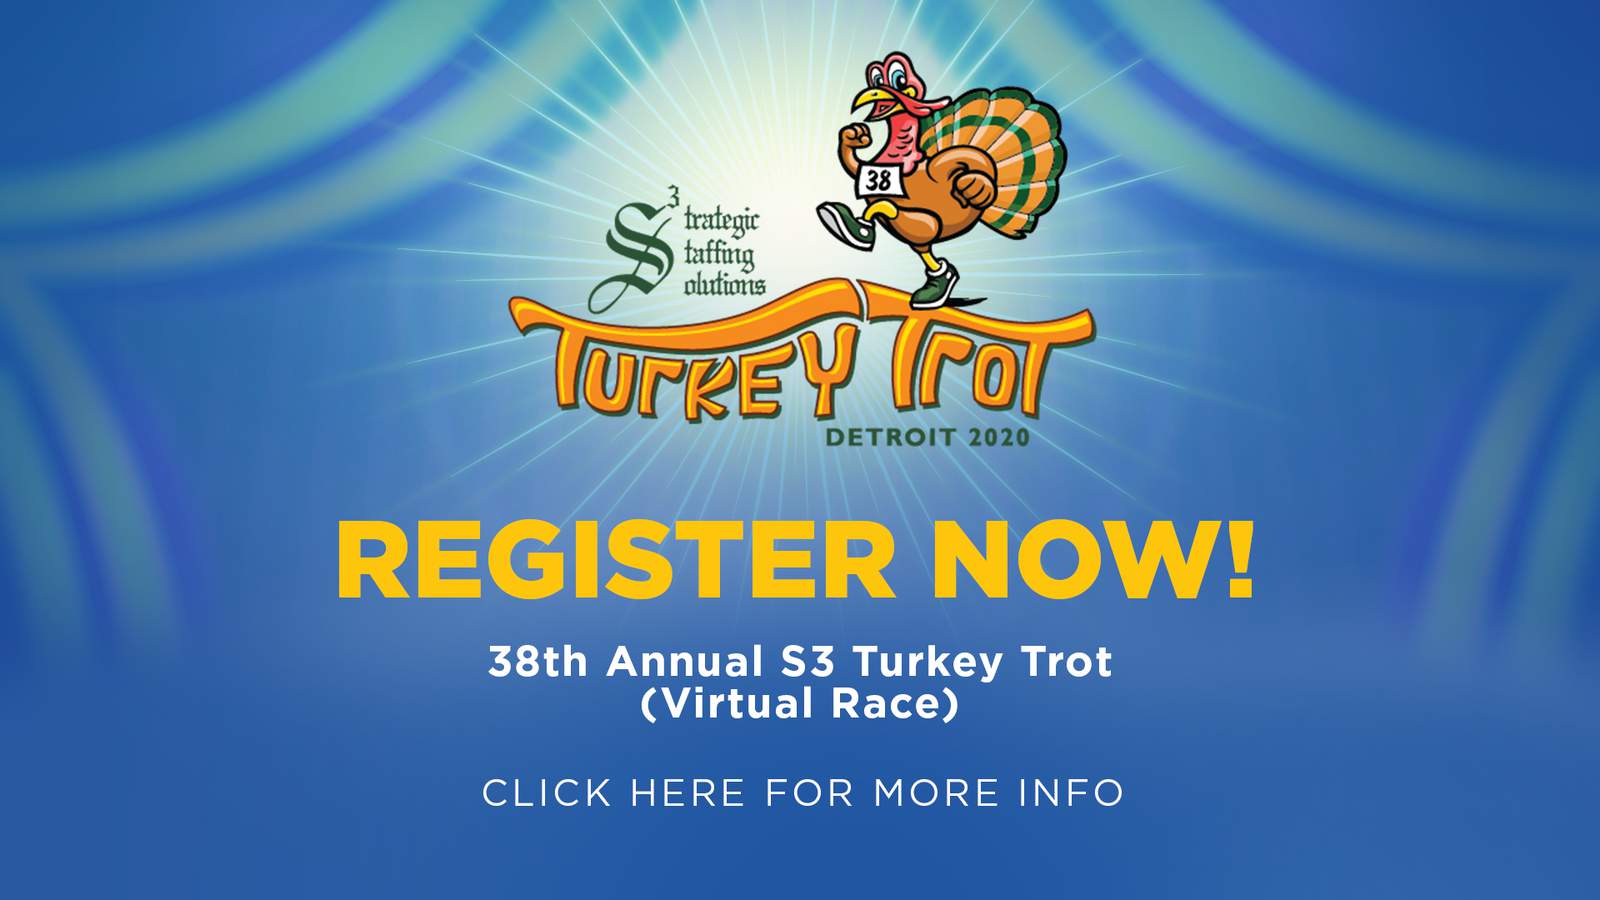 Register now for the virtual Turkey Trot race